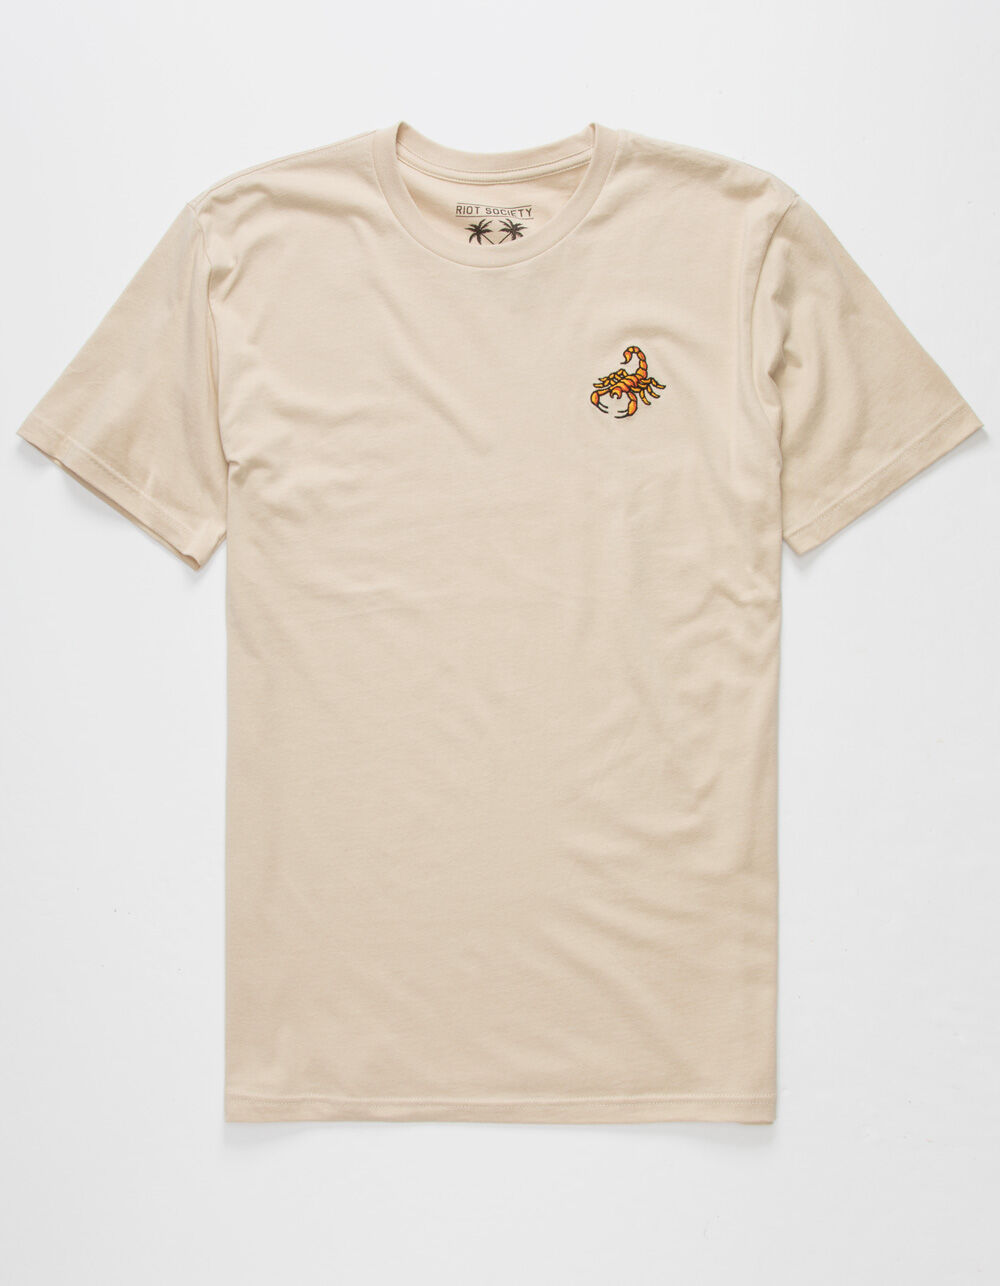 RIOT SOCIETY Scorpion Embroidered Mens T-Shirt - SAND | Tillys